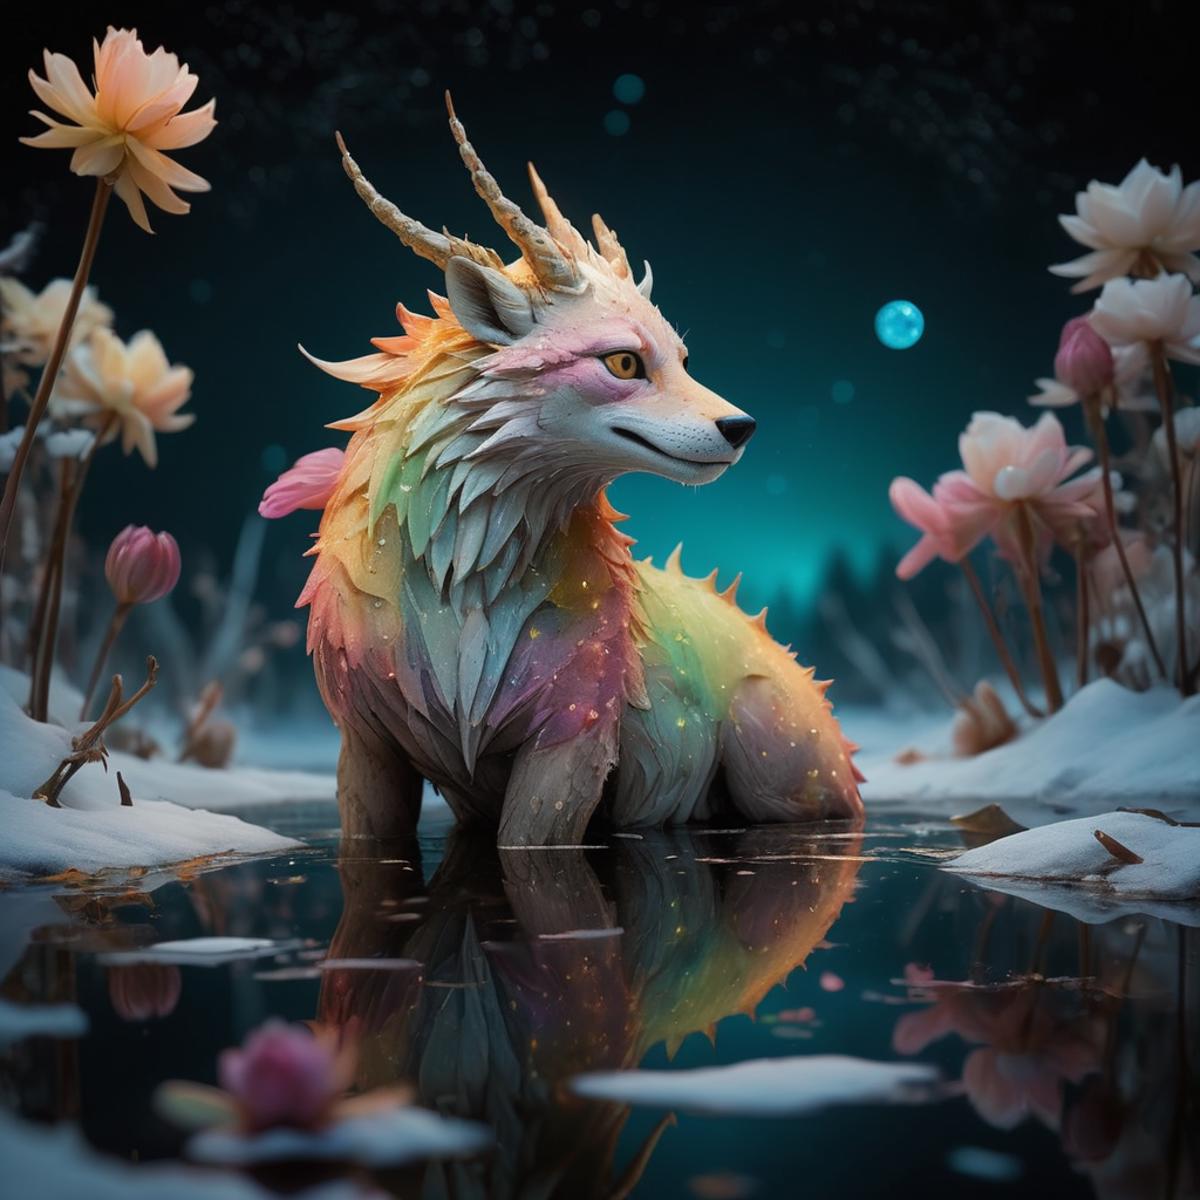 A white, pink, and yellow dog with a rainbow colored mane and horns, sitting in a pond surrounded by flowers.